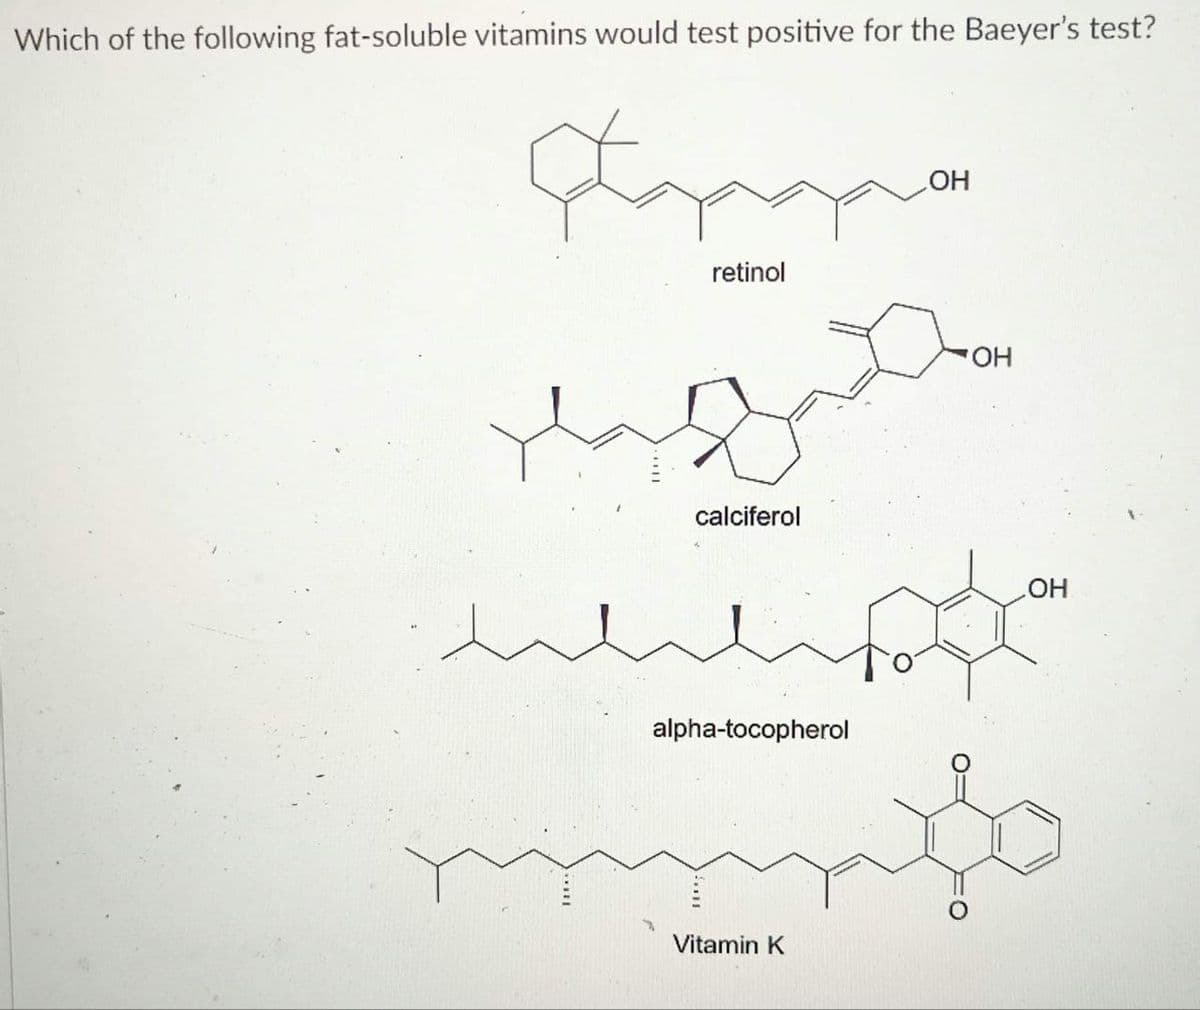 Which of the following fat-soluble vitamins would test positive for the Baeyer's test?
Champanya
retinol
بلند
calciferol
alpha-tocopherol
Vitamin K
OH
OH
OH